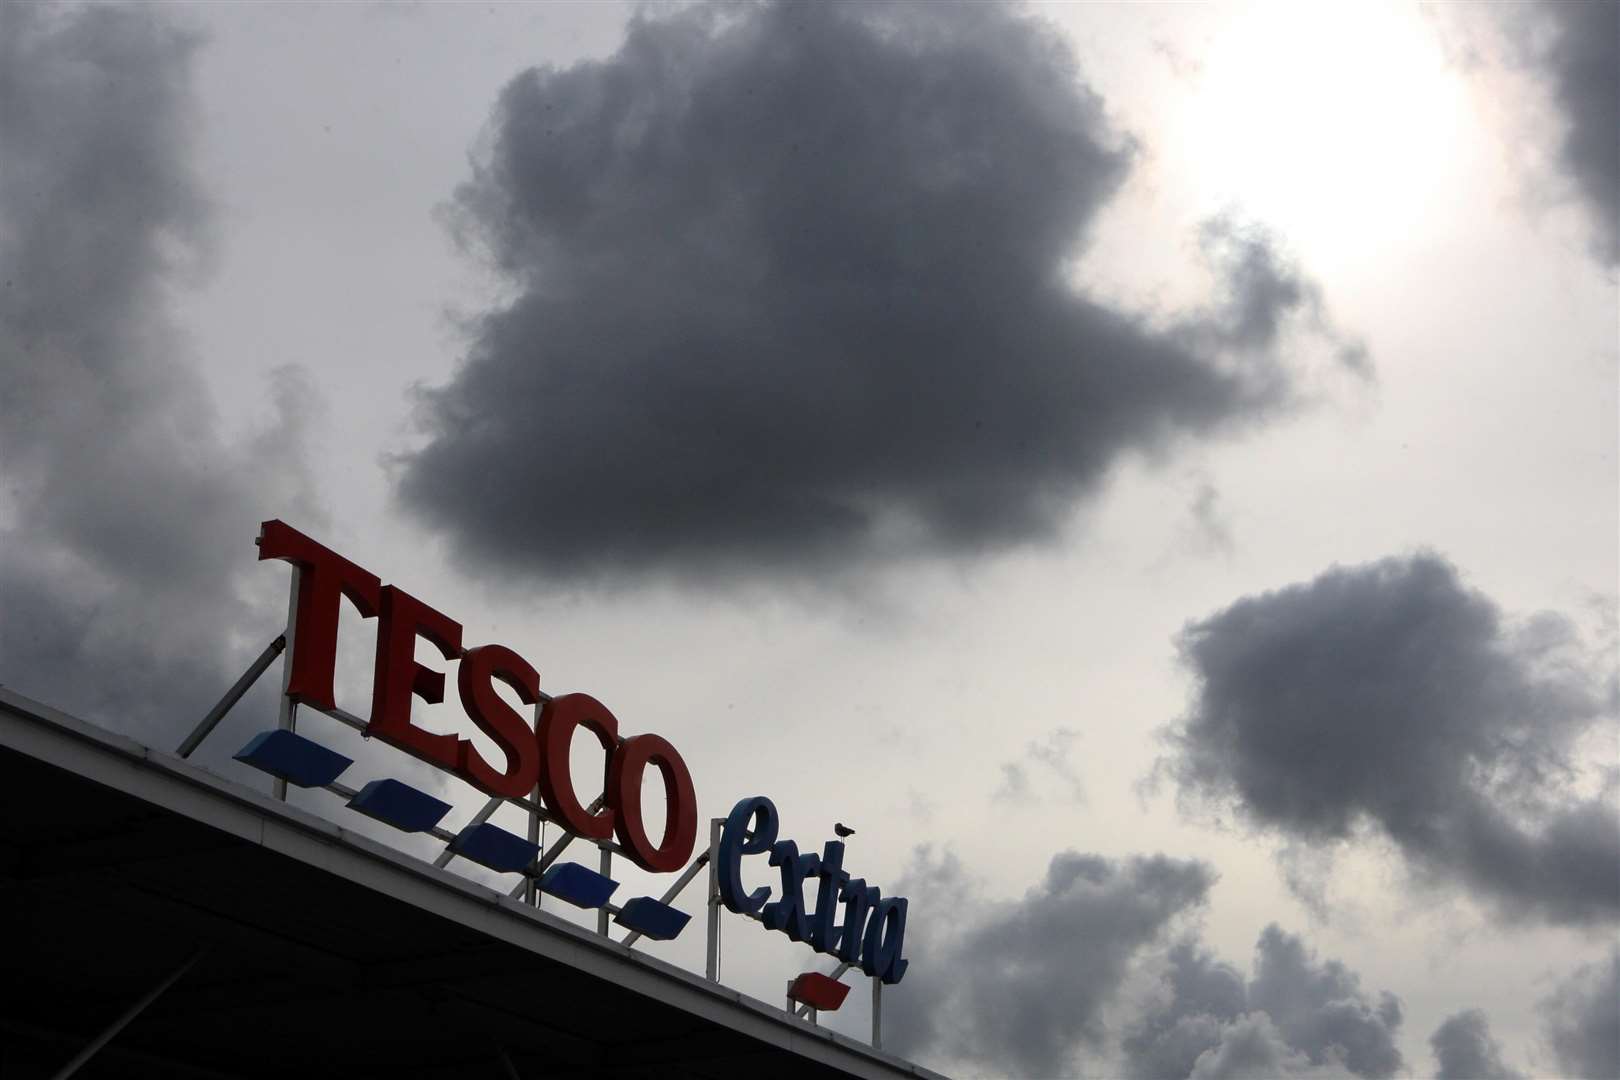 Are clouds gathering over some of Tesco's Kent stores?